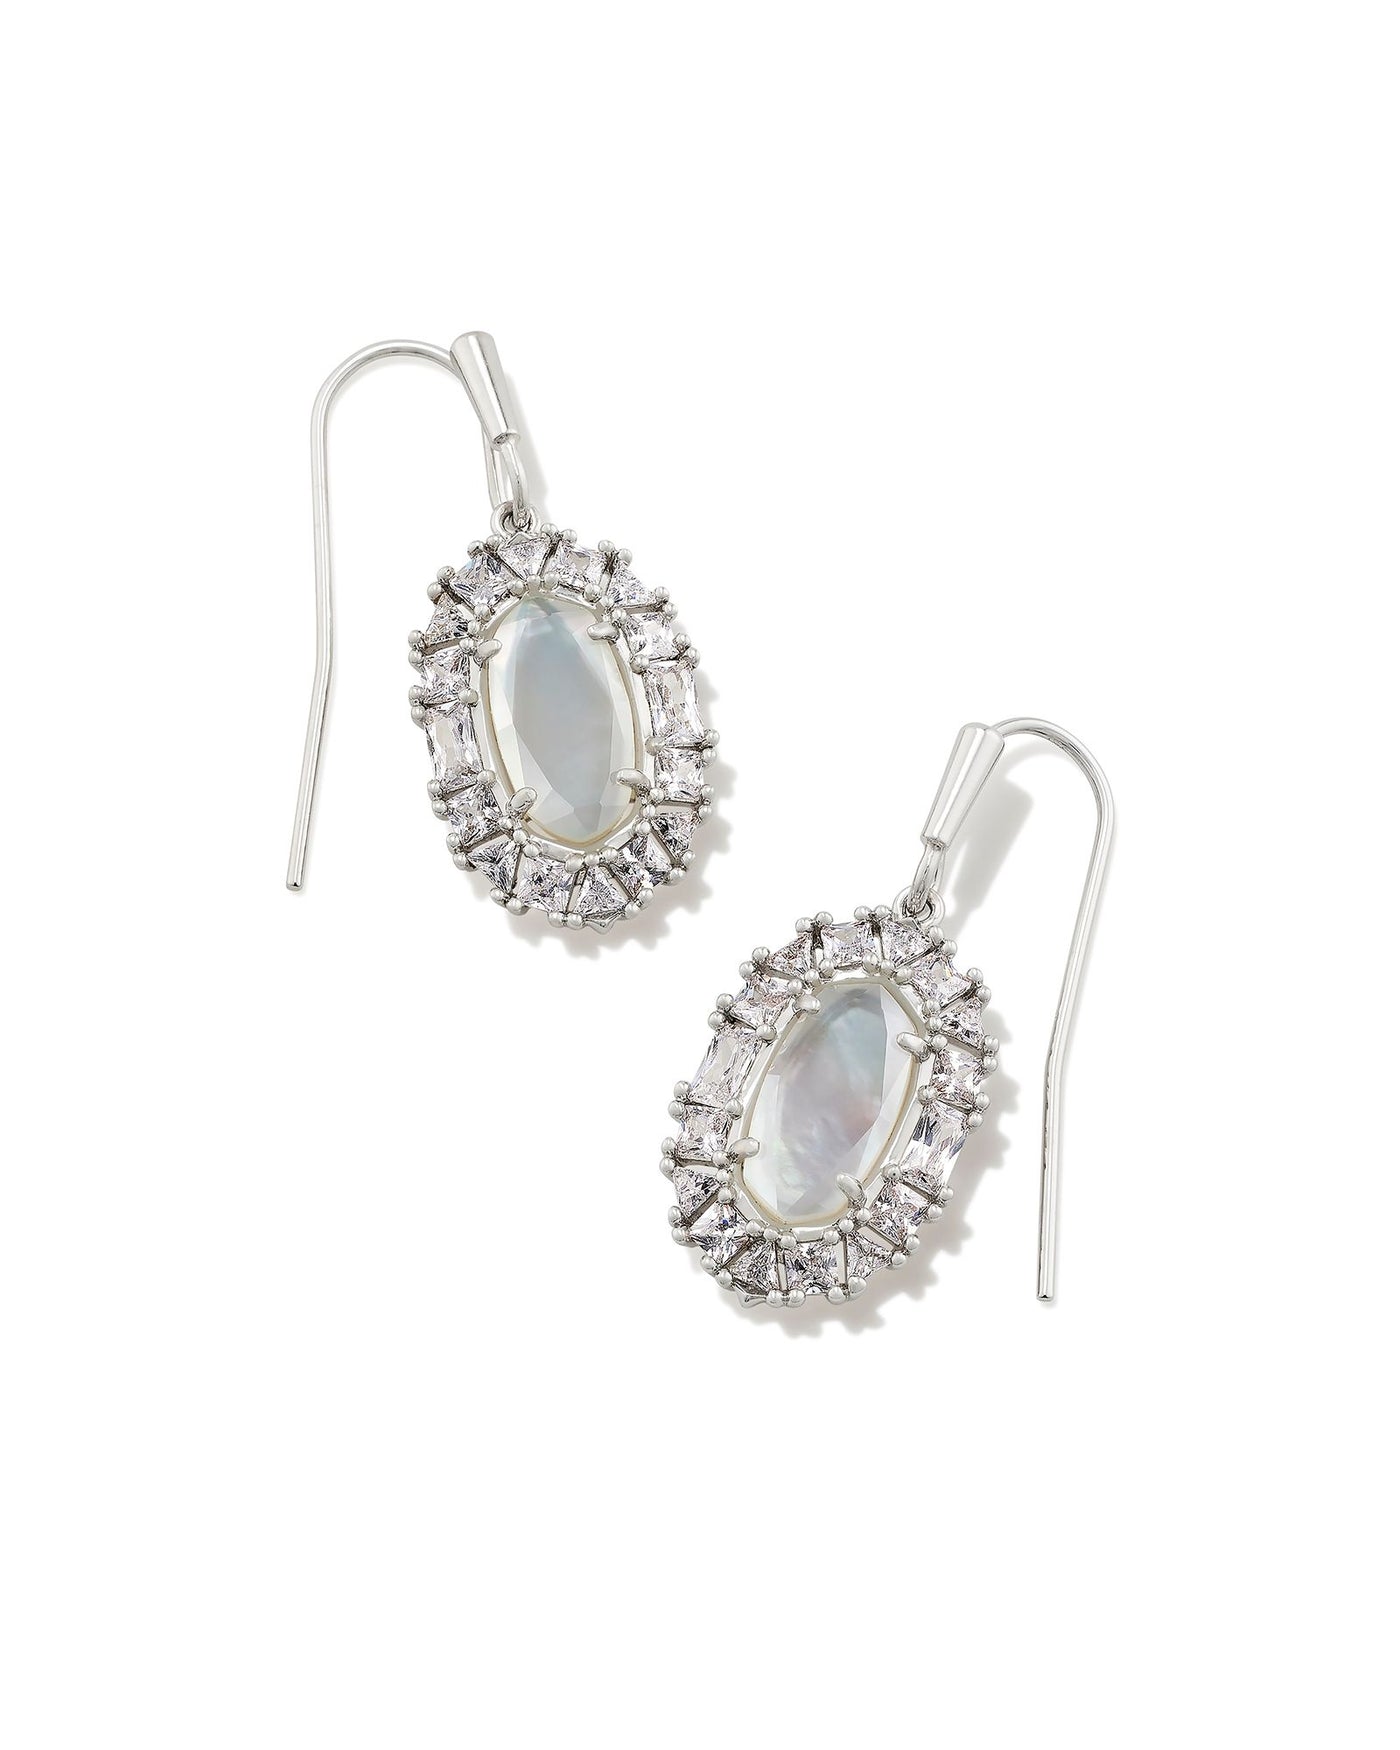 Kendra Scott Lee Crystal Frame Drop Earrings in Mother of Pearl-Earrings-Kendra Scott-Market Street Nest, Fashionable Clothing, Shoes and Home Décor Located in Mabank, TX